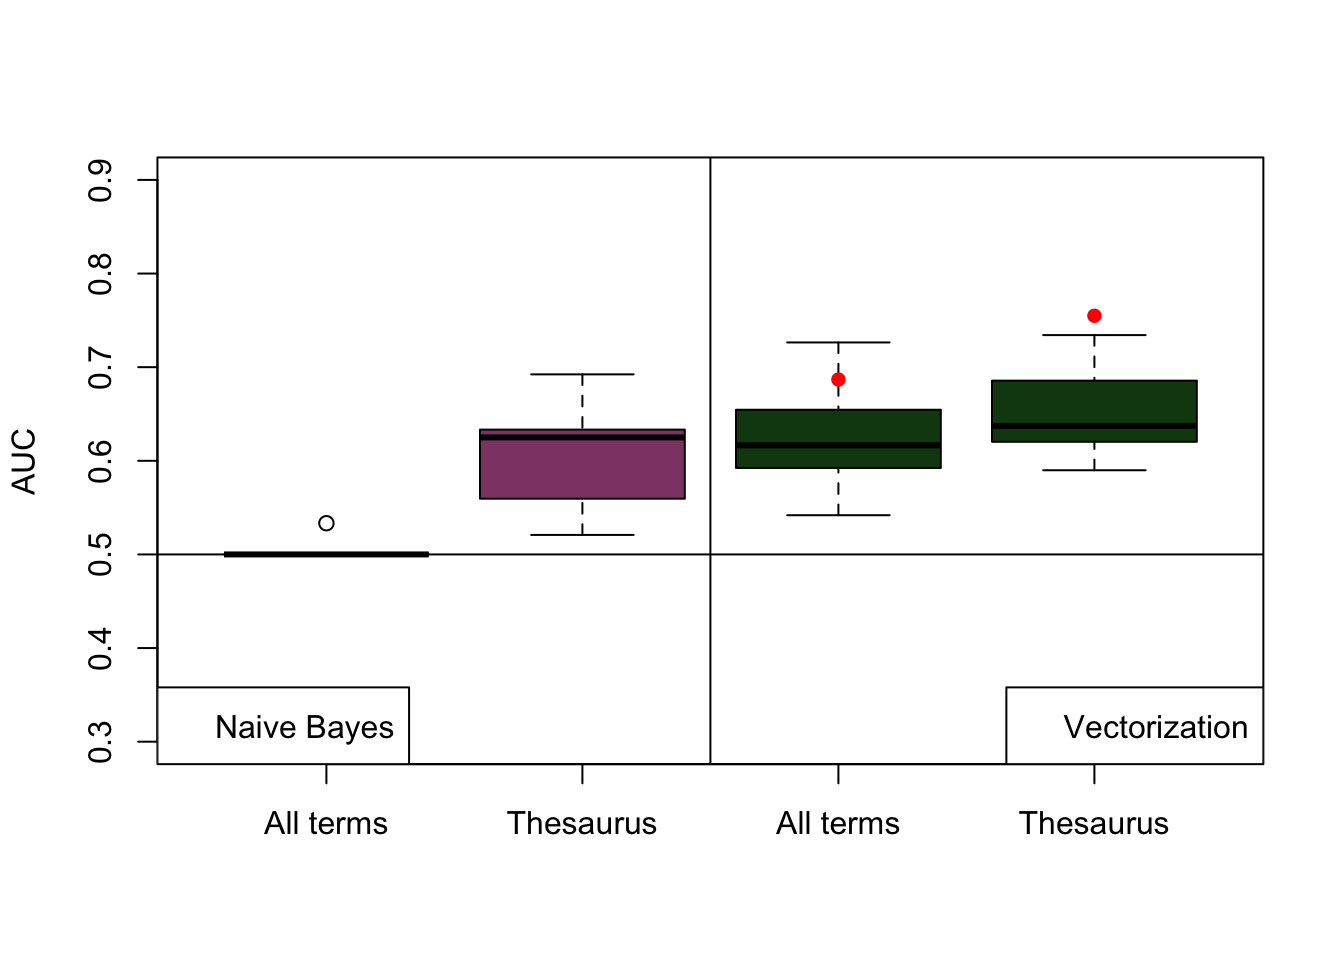 Performance of models used to classify articles. Boxplots are the results of AUC for 10 replicates of test predictions using naiveBayes classifier (purple) and the AUC of the logistic model with crossvalidation k = 3 (green). Red dots indicate the results of the logistic model over a test sample. All models were trained with 80 articles and tested with 20 (split 80:20)